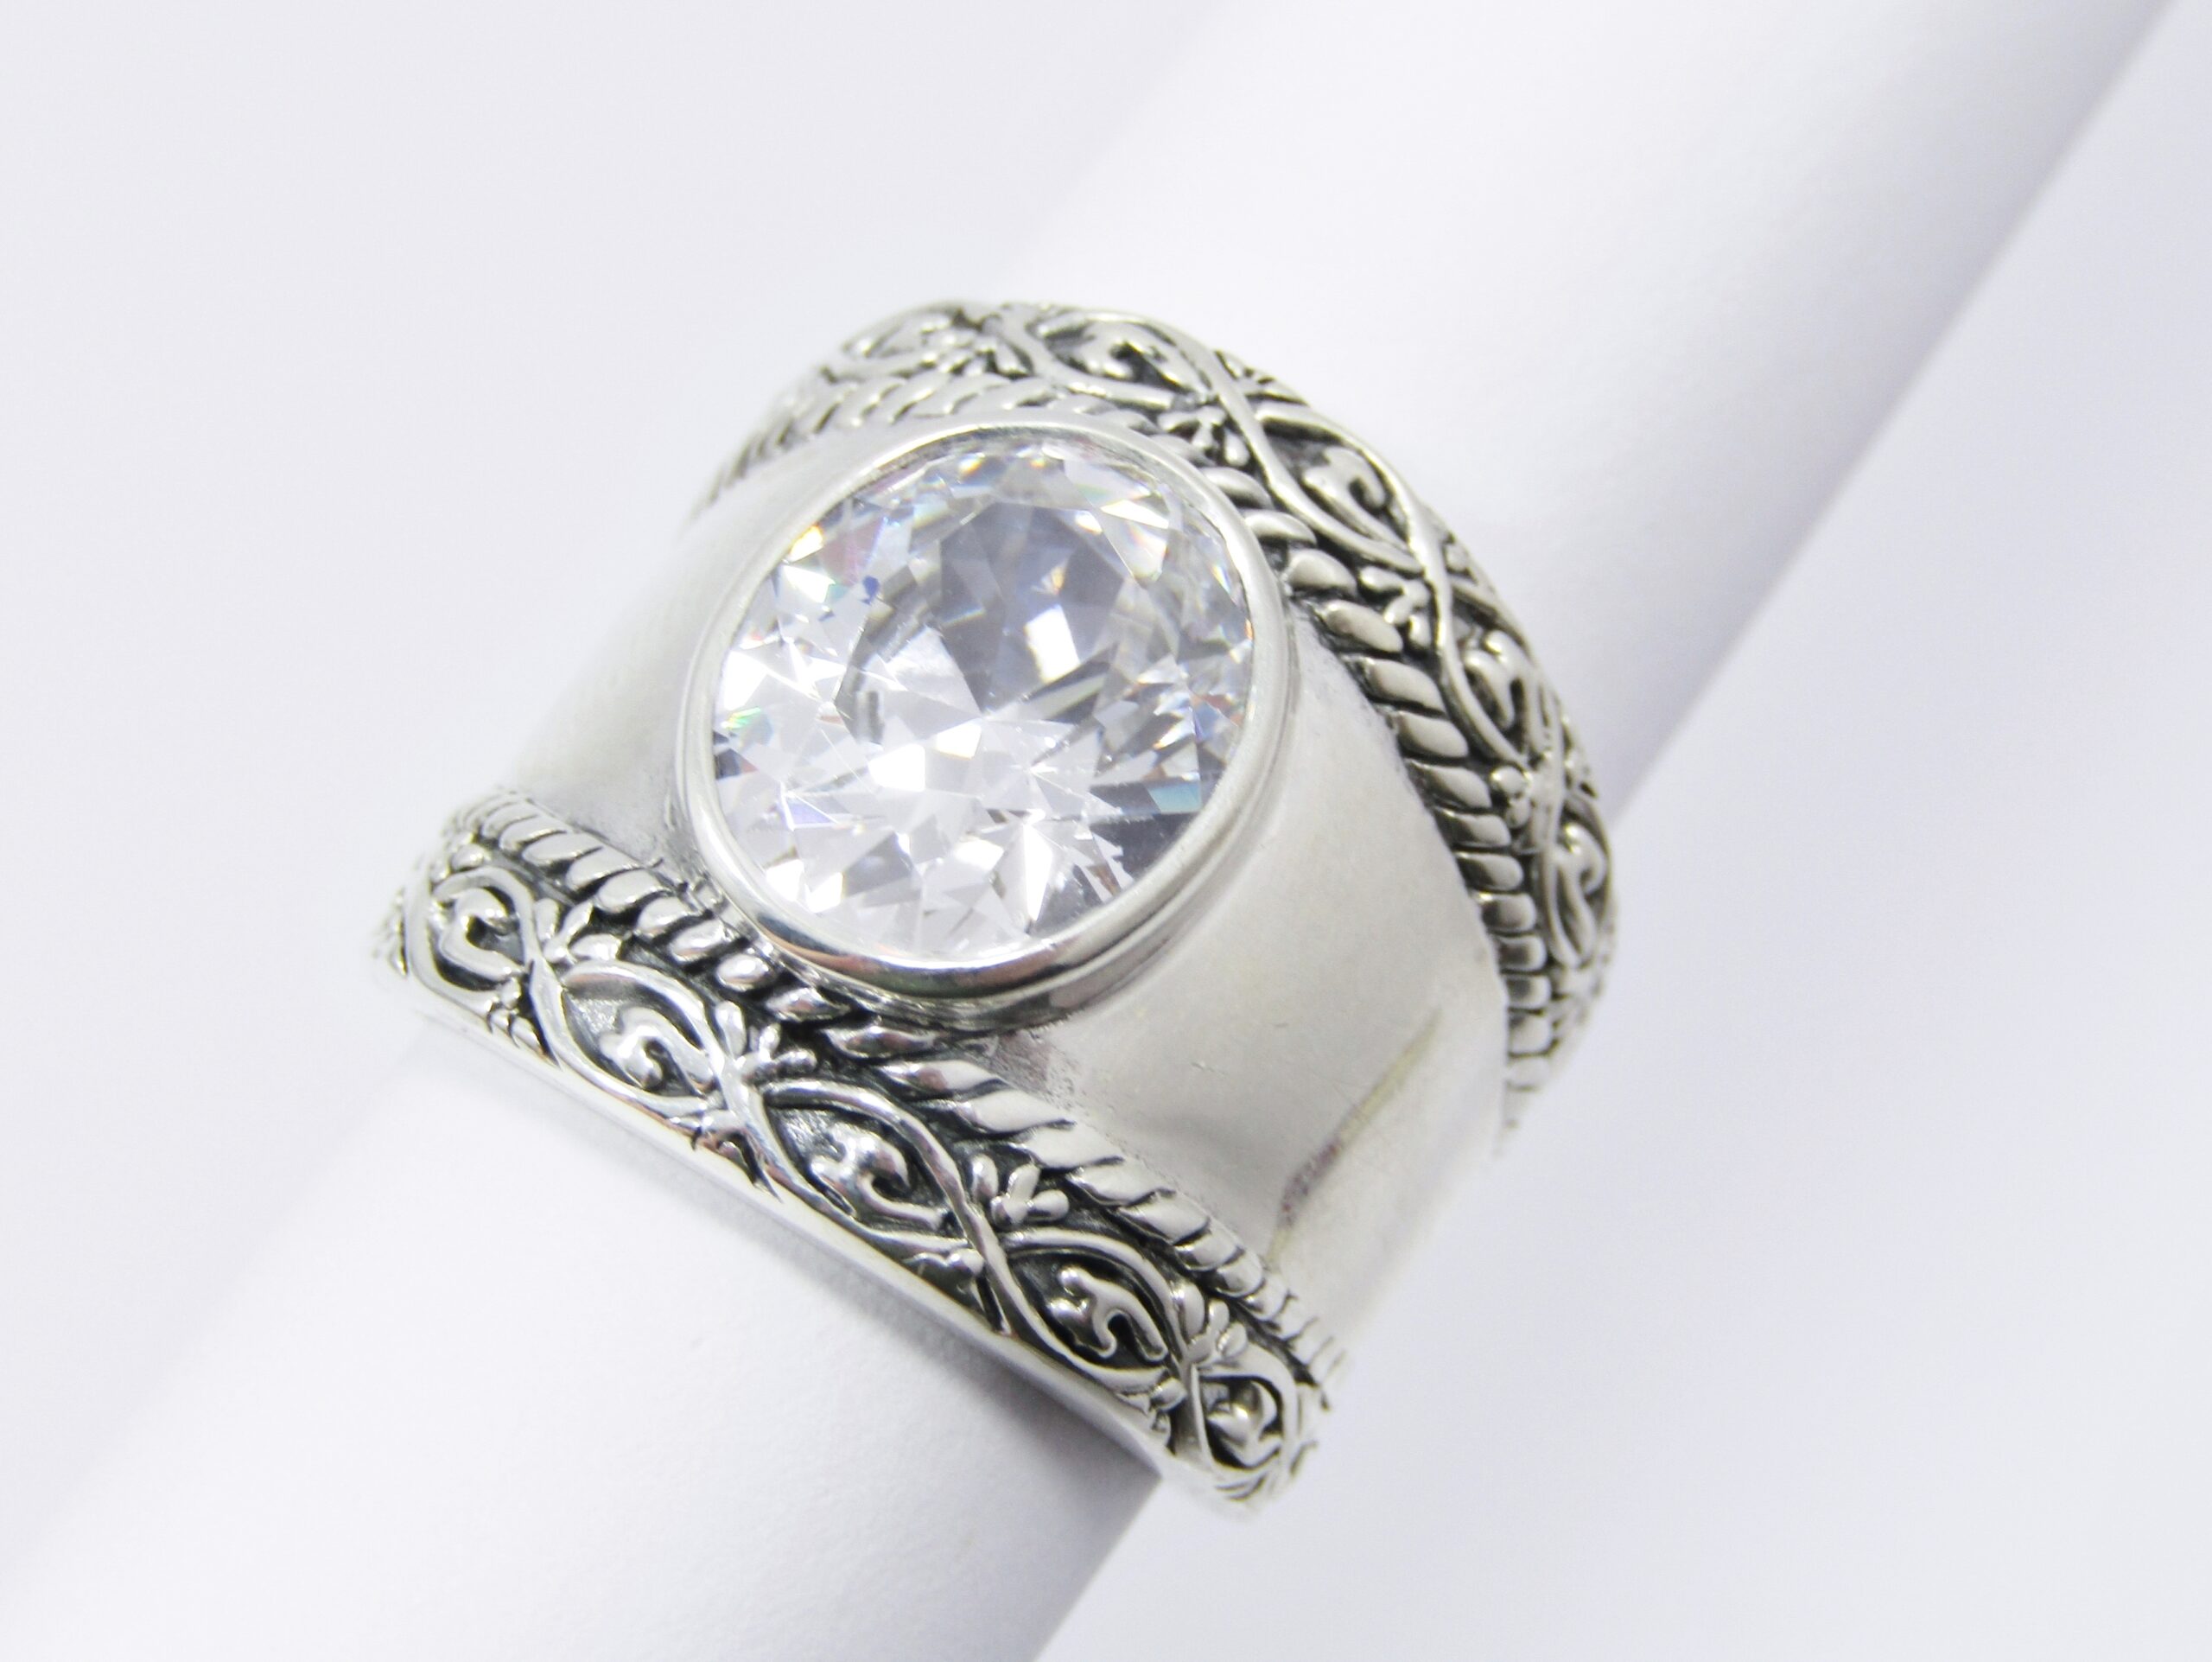 A Gorgeous Chunky Clear Zirconia Ring in Sterling Silver.